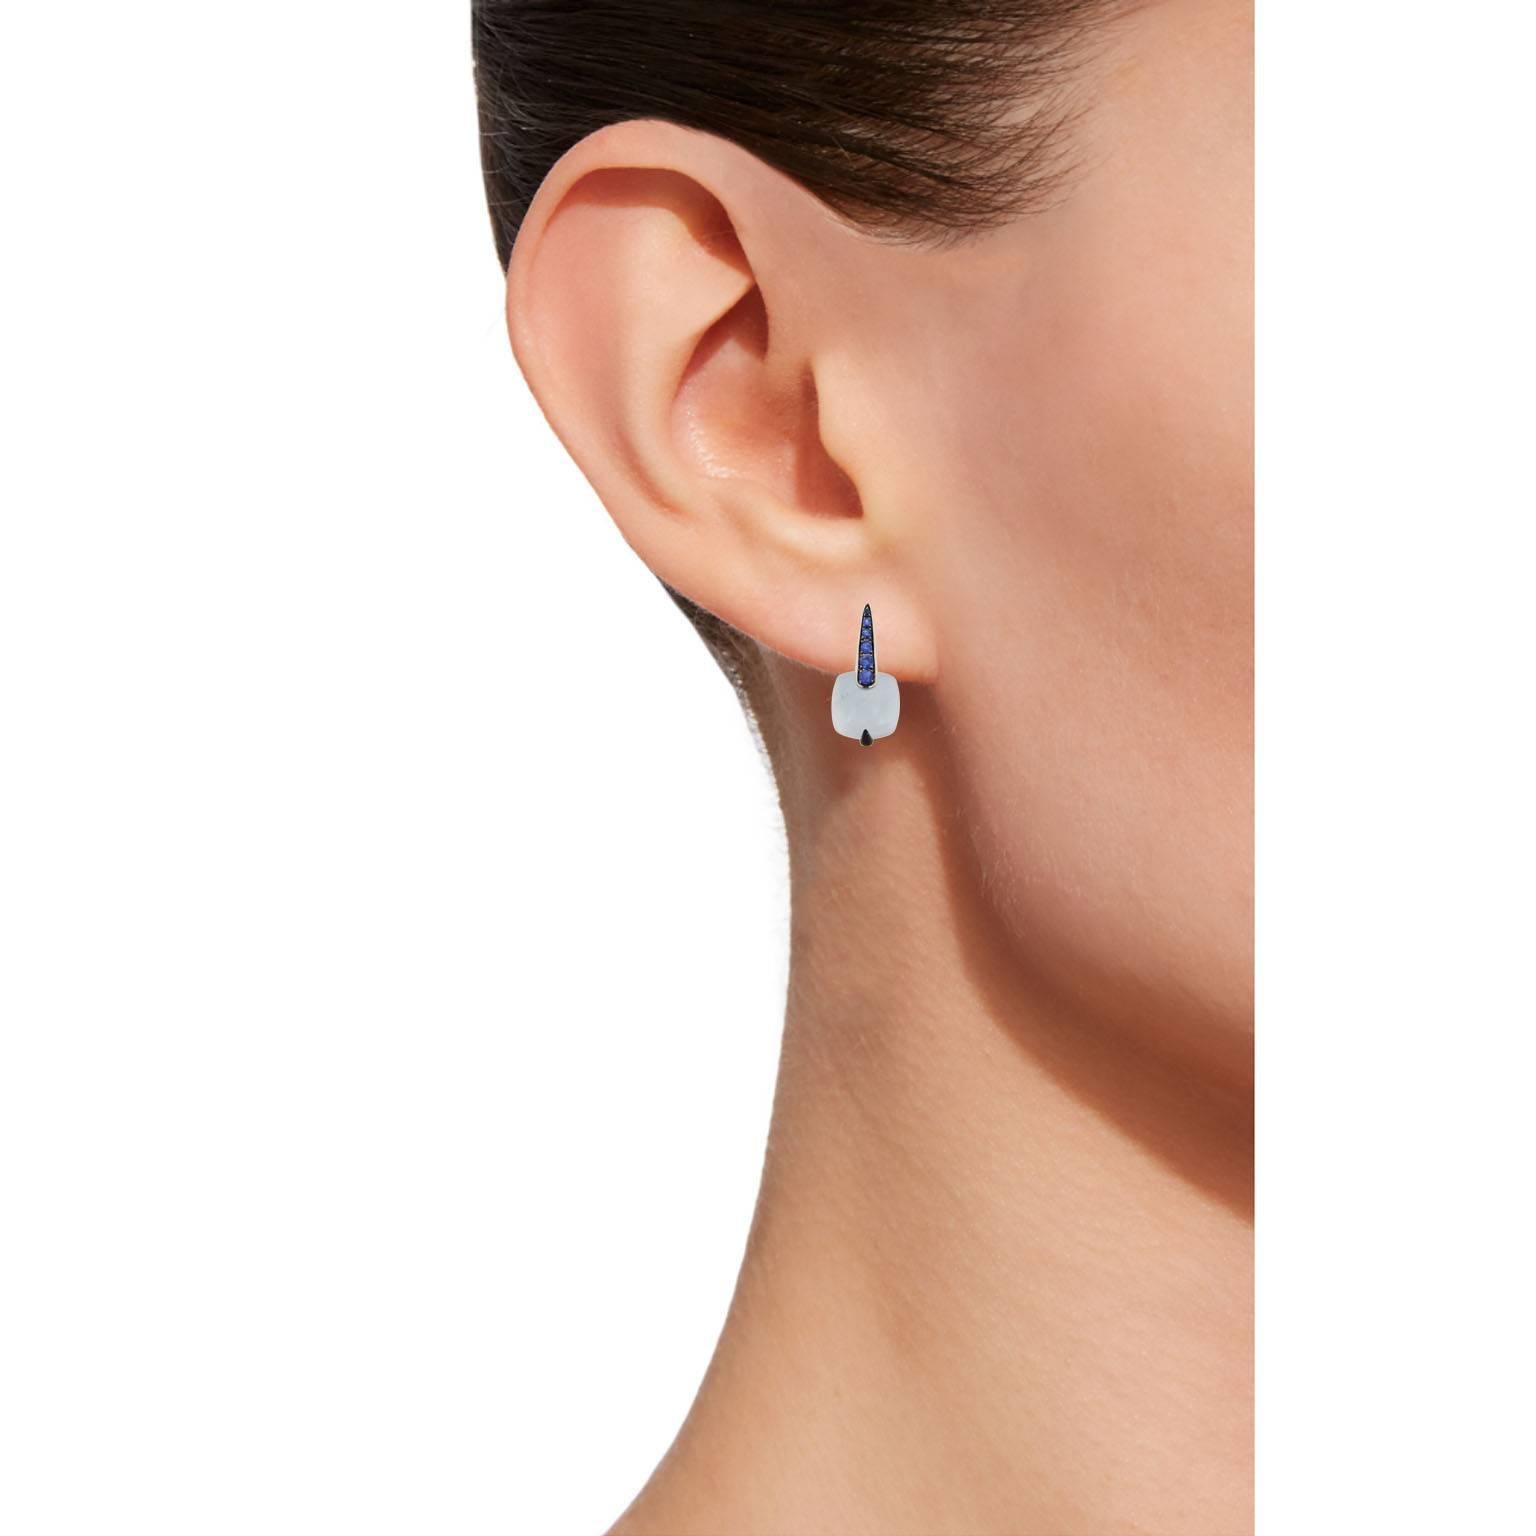 Jona design collection, hand crafted in Italy, 18 karat white gold earrings set with two square cabochon Aquamarine weighing 11 carats in total, dressed with a 0.34 carats of blue sapphire pavé.
Dimensions:
0.83 in. H x 0.40 in. W x 0.33 in. D
21